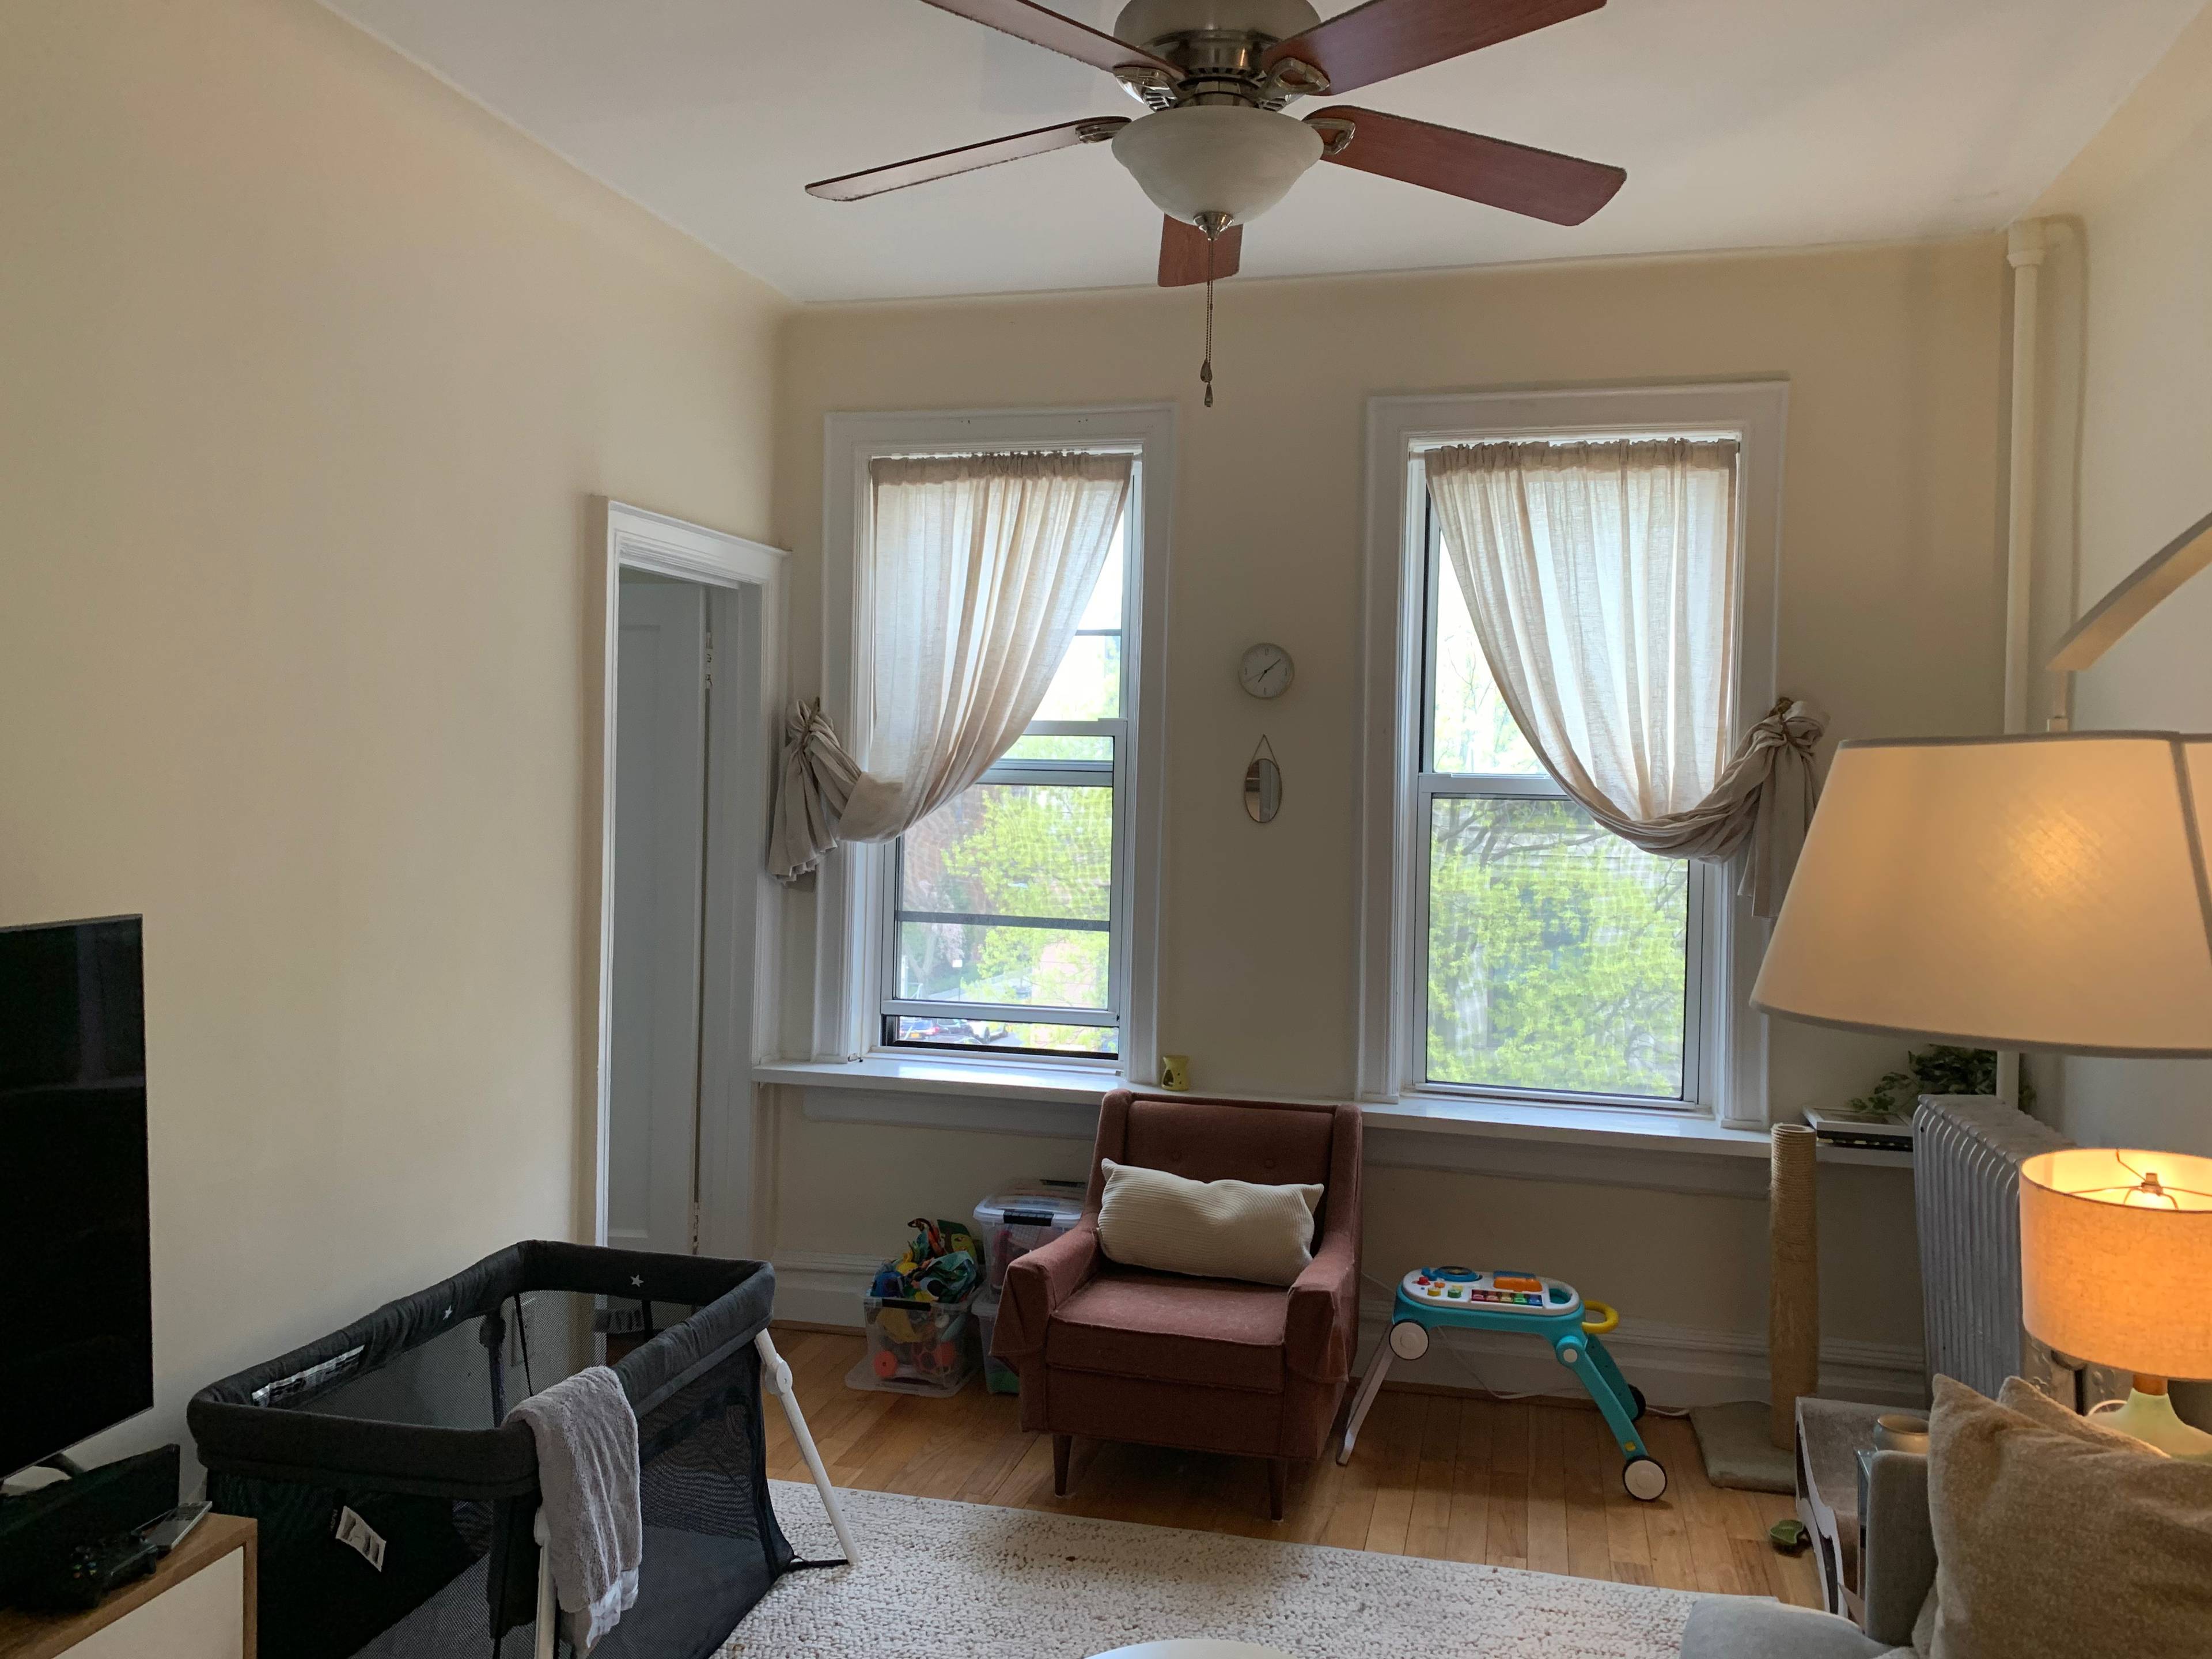 Excellently Maintained 1200 Square feet True Park Slope Gem 3 bedrooms with in unit Laundry room, and storage.